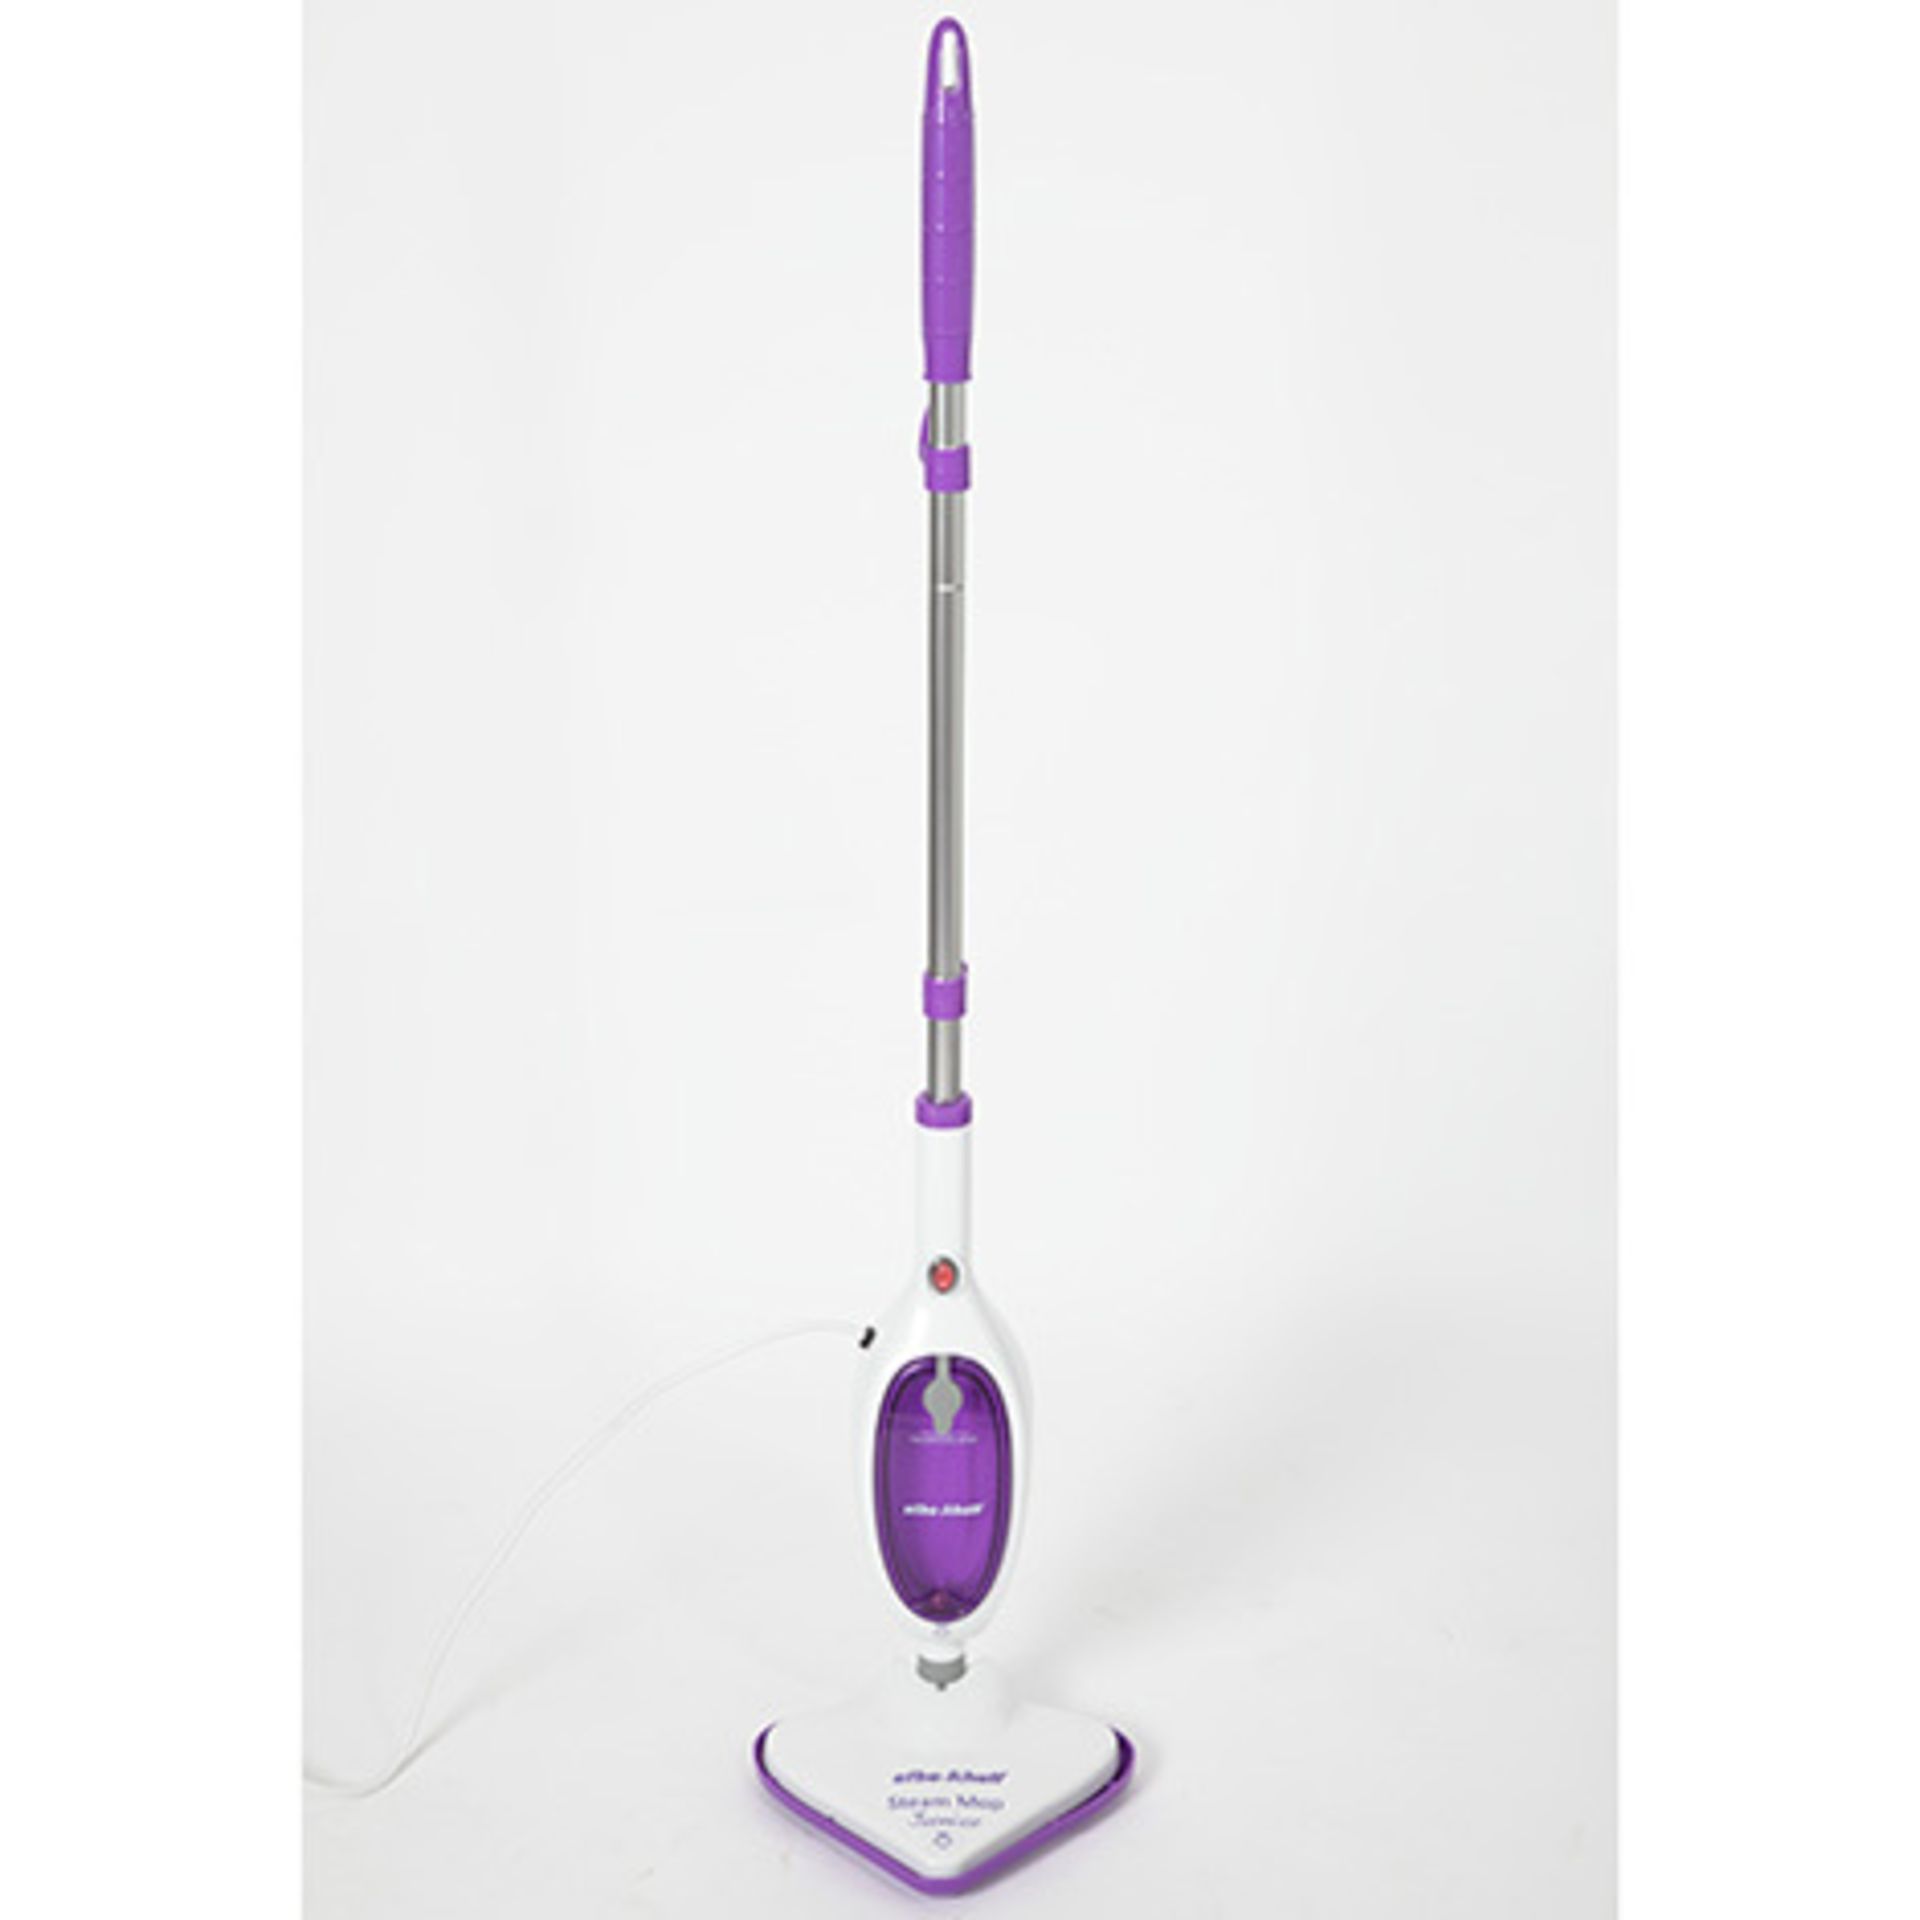 V Efbe-Schott Steam Mop (New And Boxed) Colours And Model May Vary RRP59.99 - Bild 2 aus 2